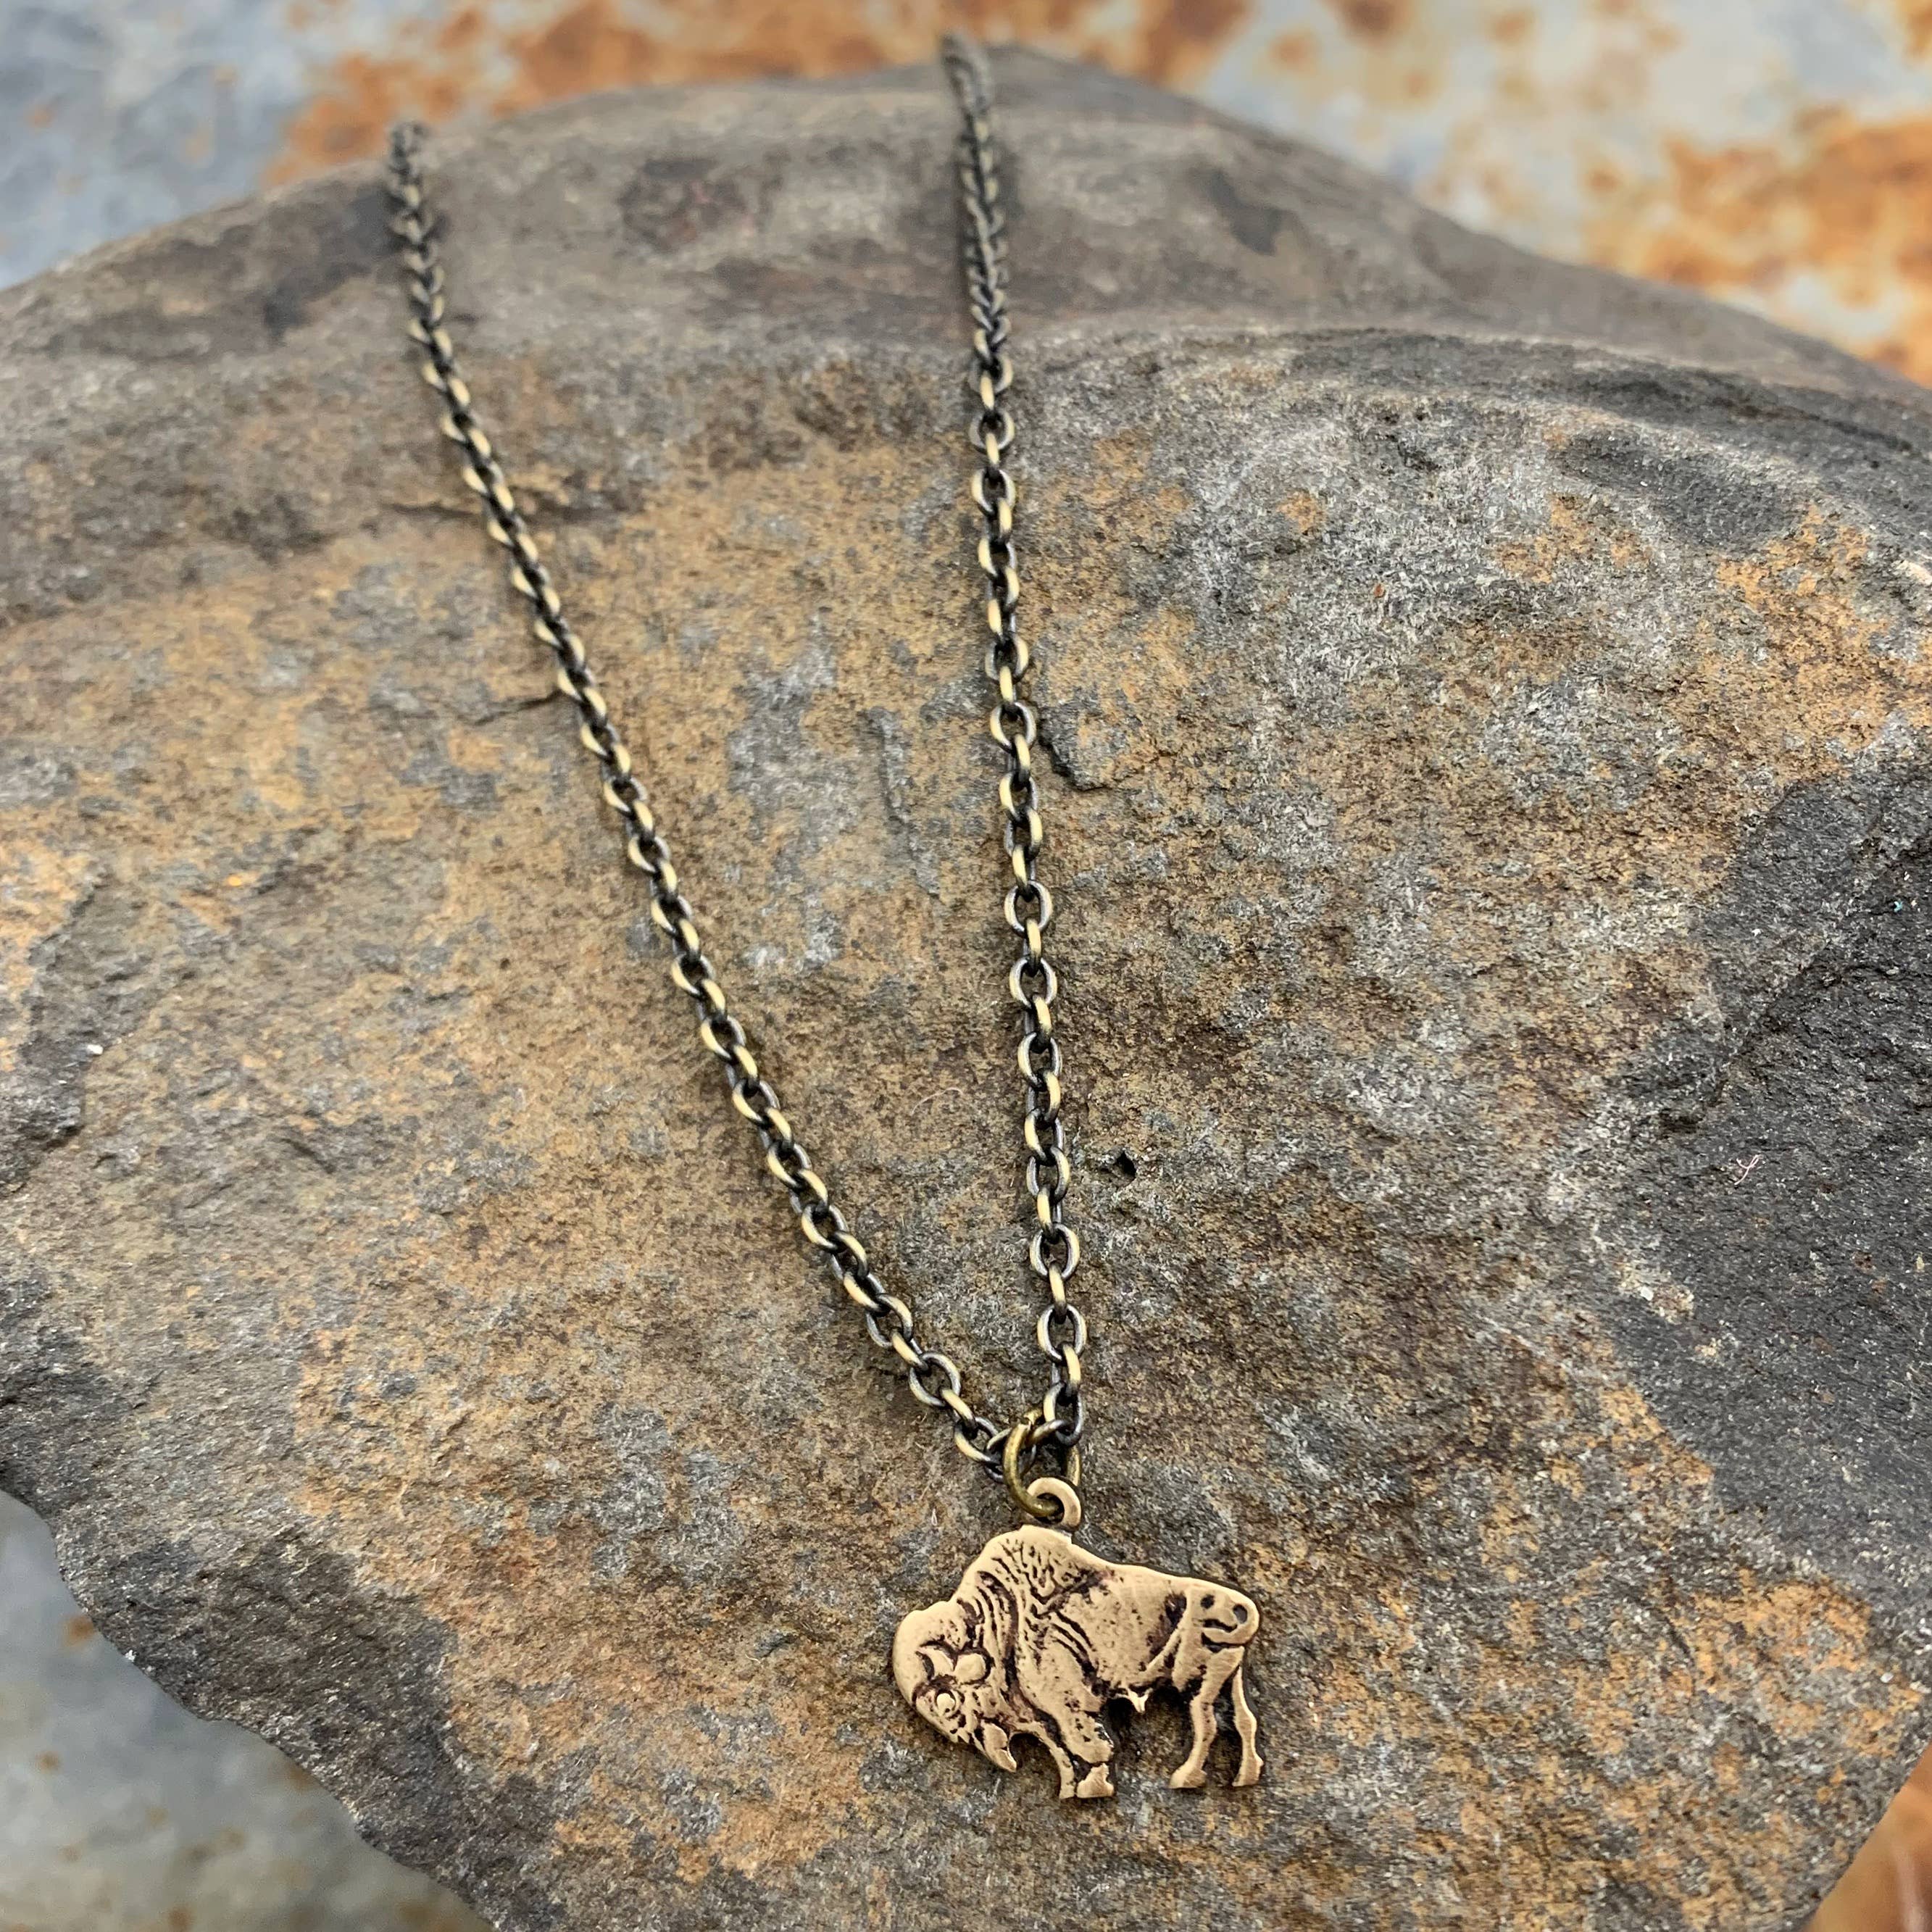 Small for Women//Girls Dayna Designs Buffalo Silver Necklace 16 Inch Solid Silver Necklace with Buffalo Charm